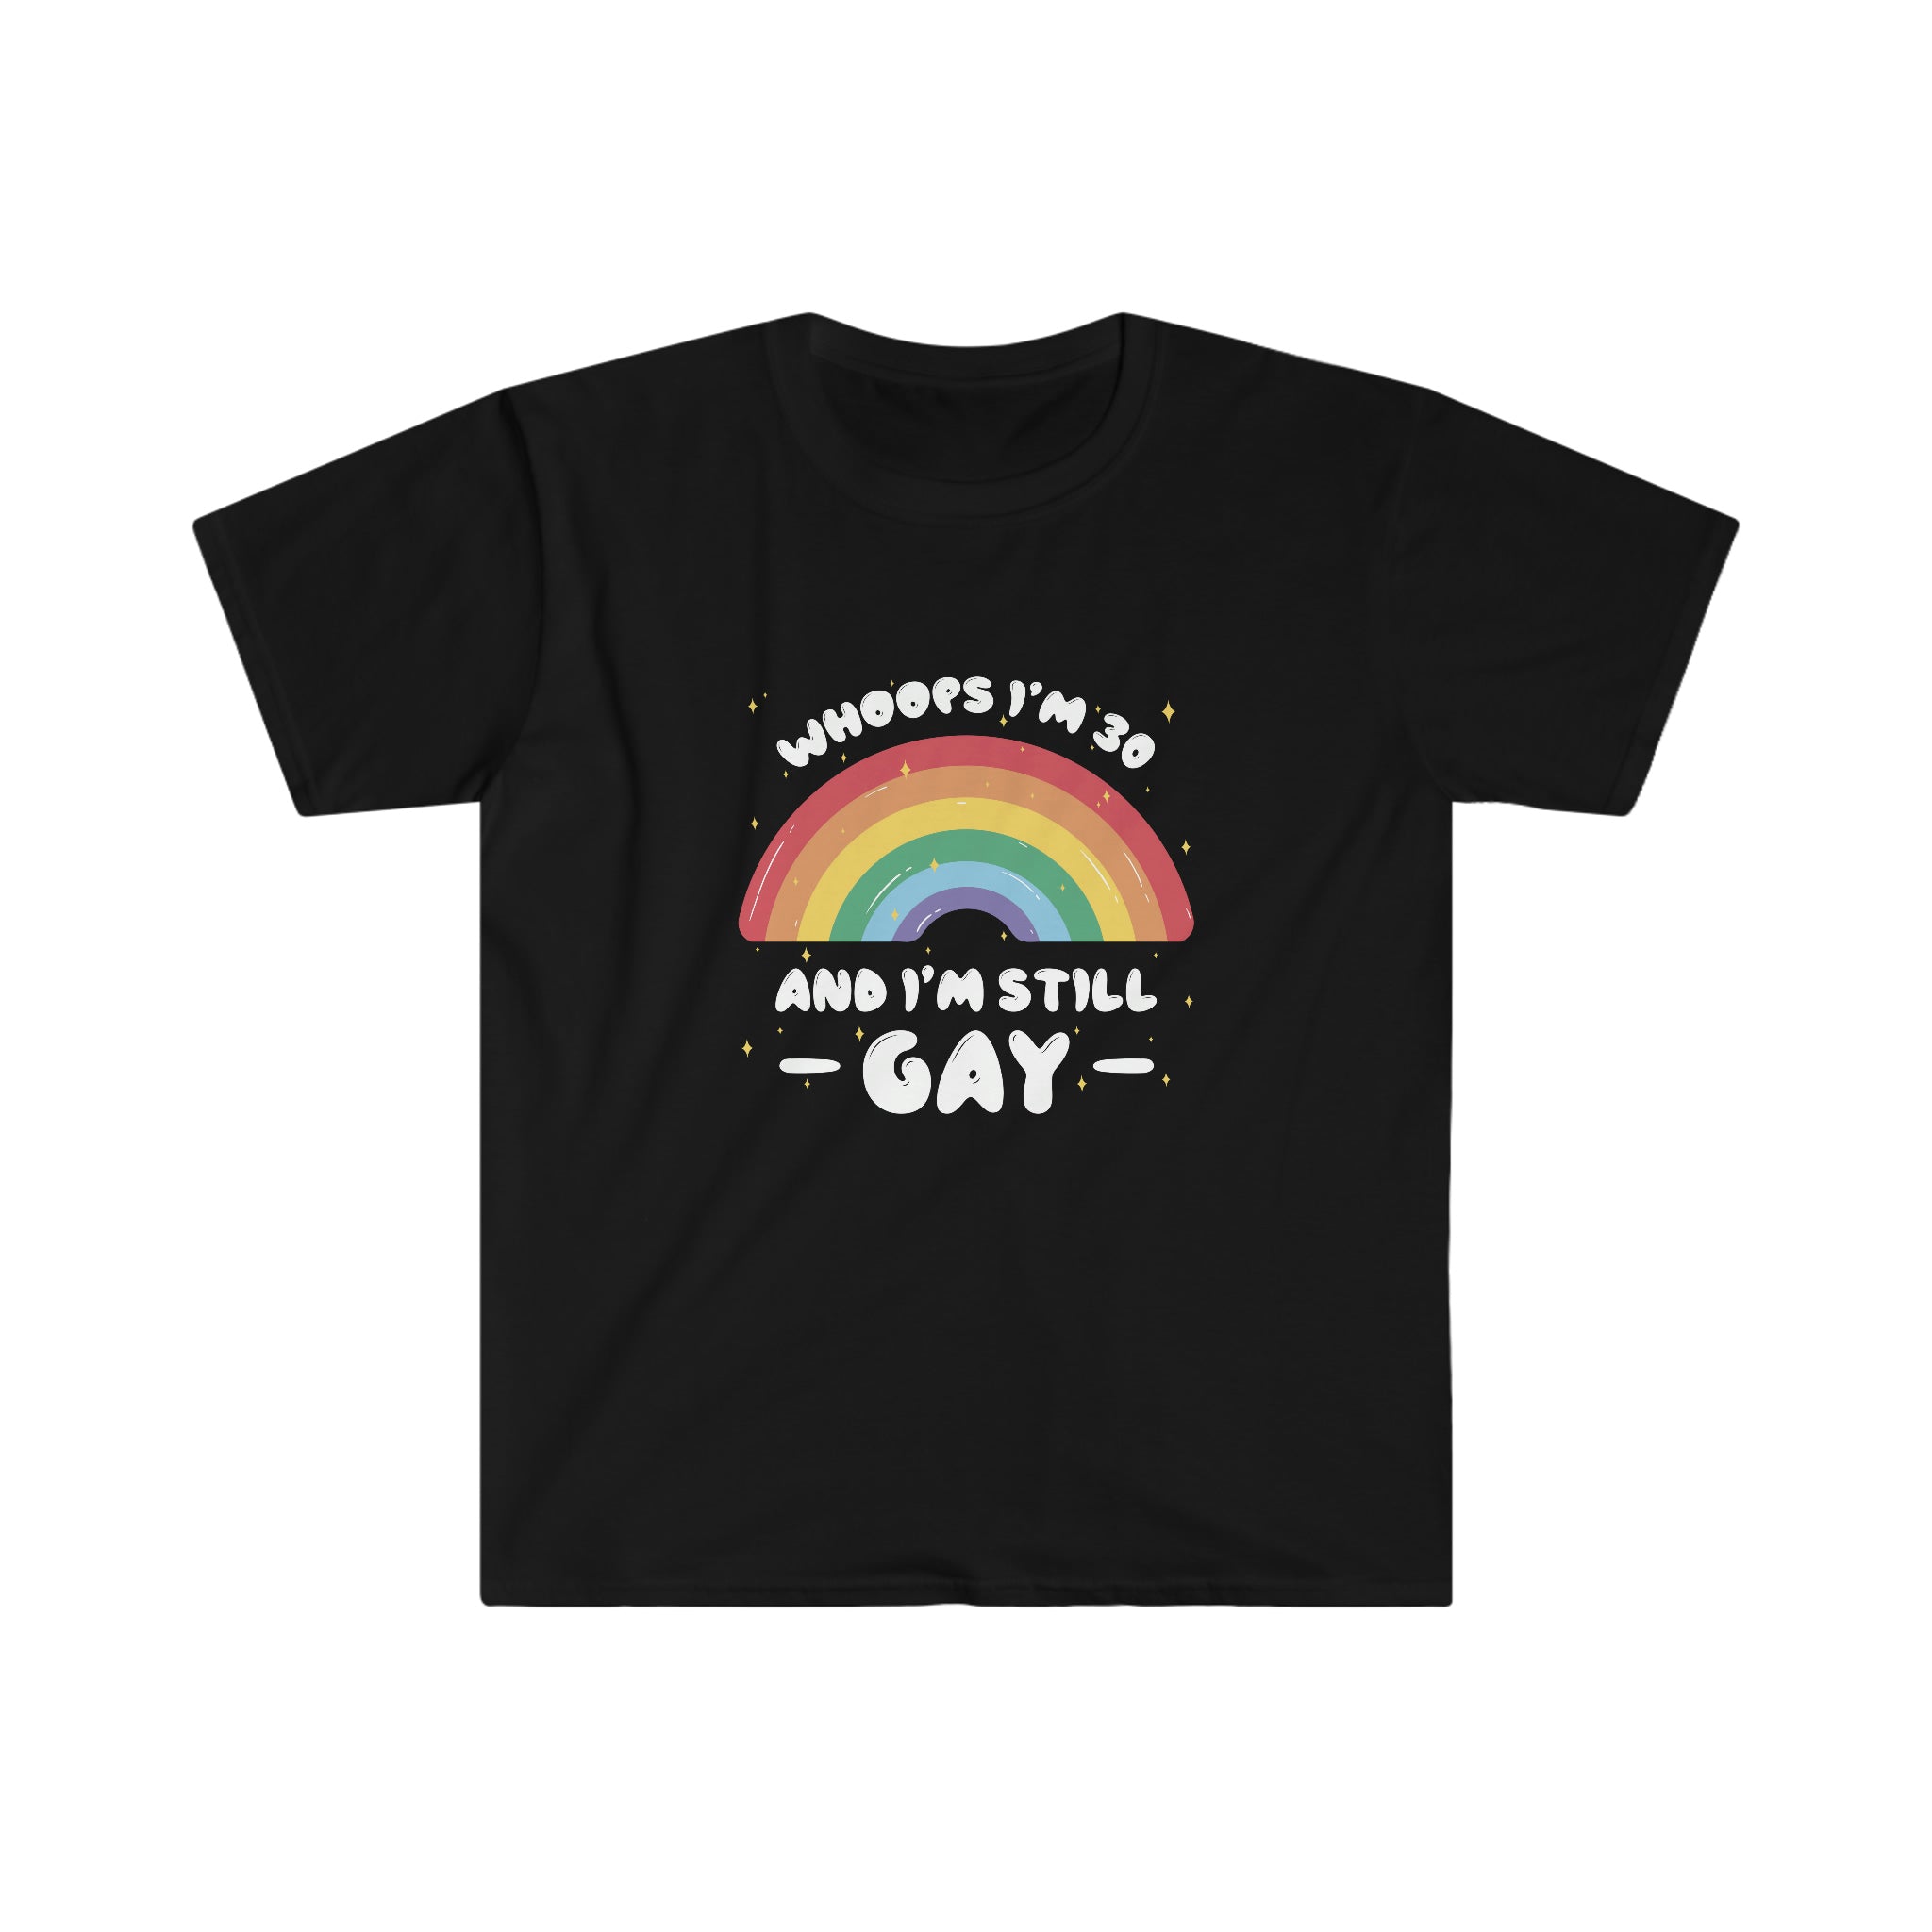 Celebrate your milestone 30th birthday with this stylish Hoorie I'm 30 T-Shirt that proudly proclaims "I'm a man and I'm still gay.